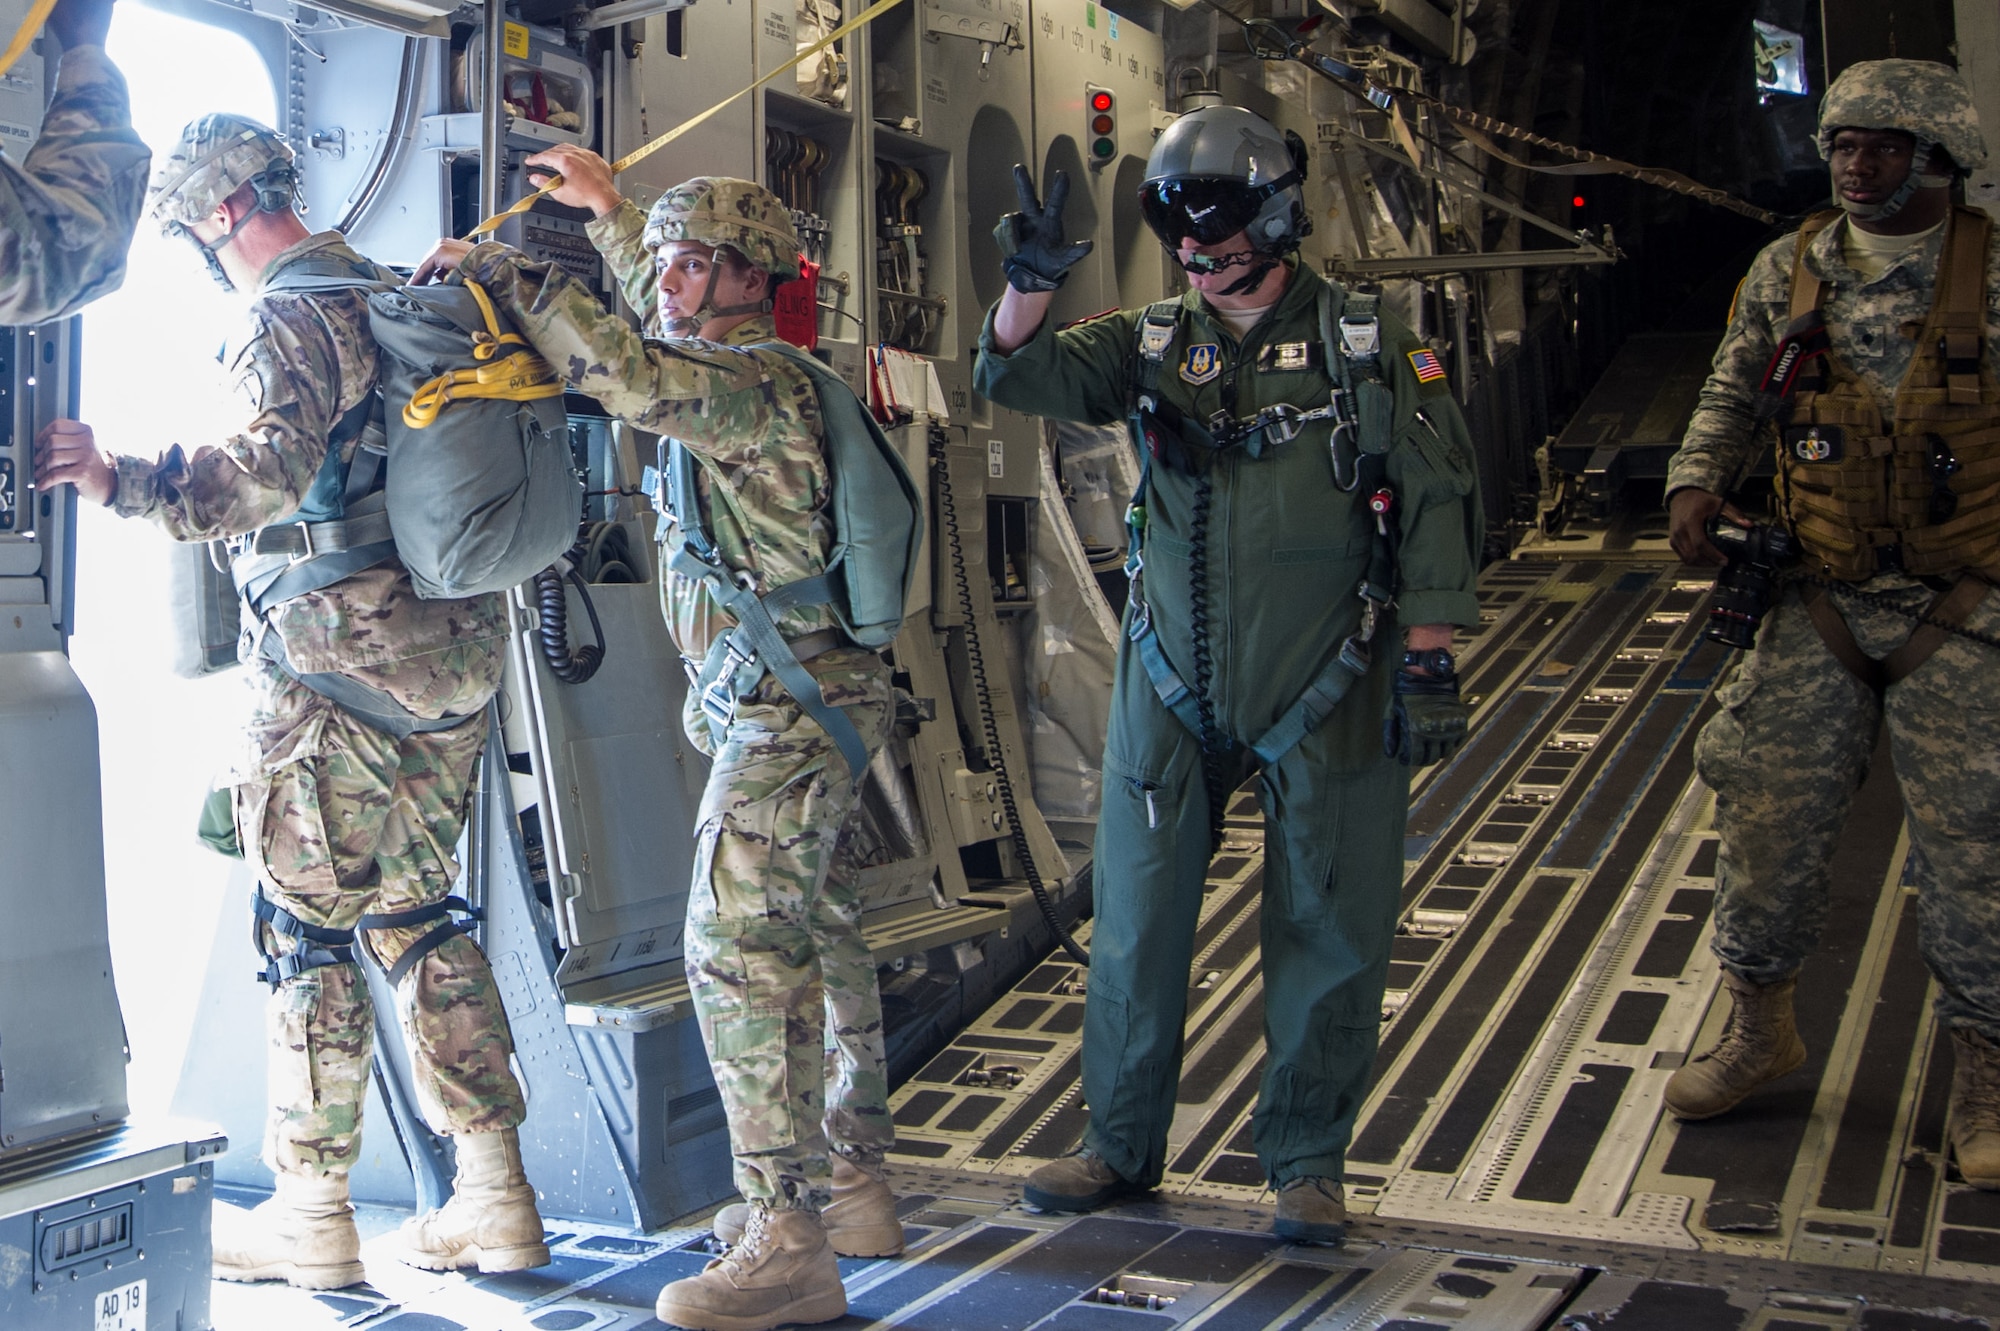 Master Sgt. Al Larson, 701st Airlift Squadron loadmaster and former U.S. Army paratrooper, communicates with hand signals during a flight over Lawson Army Airfield, Fort Benning, Ga. Aug. 15, 2015. Reserve aircrews from the 701st and 300th AS out of Joint Base Charleston, S.C. flew two C-17s during Fort Benning’s celebration of the 75th anniversary of the U.S. Army Airborne School. Almost 300 paratroopers took the big leap in the day’s event. (U.S. Air Force photo by Staff Sgt. Bobby Pilch)